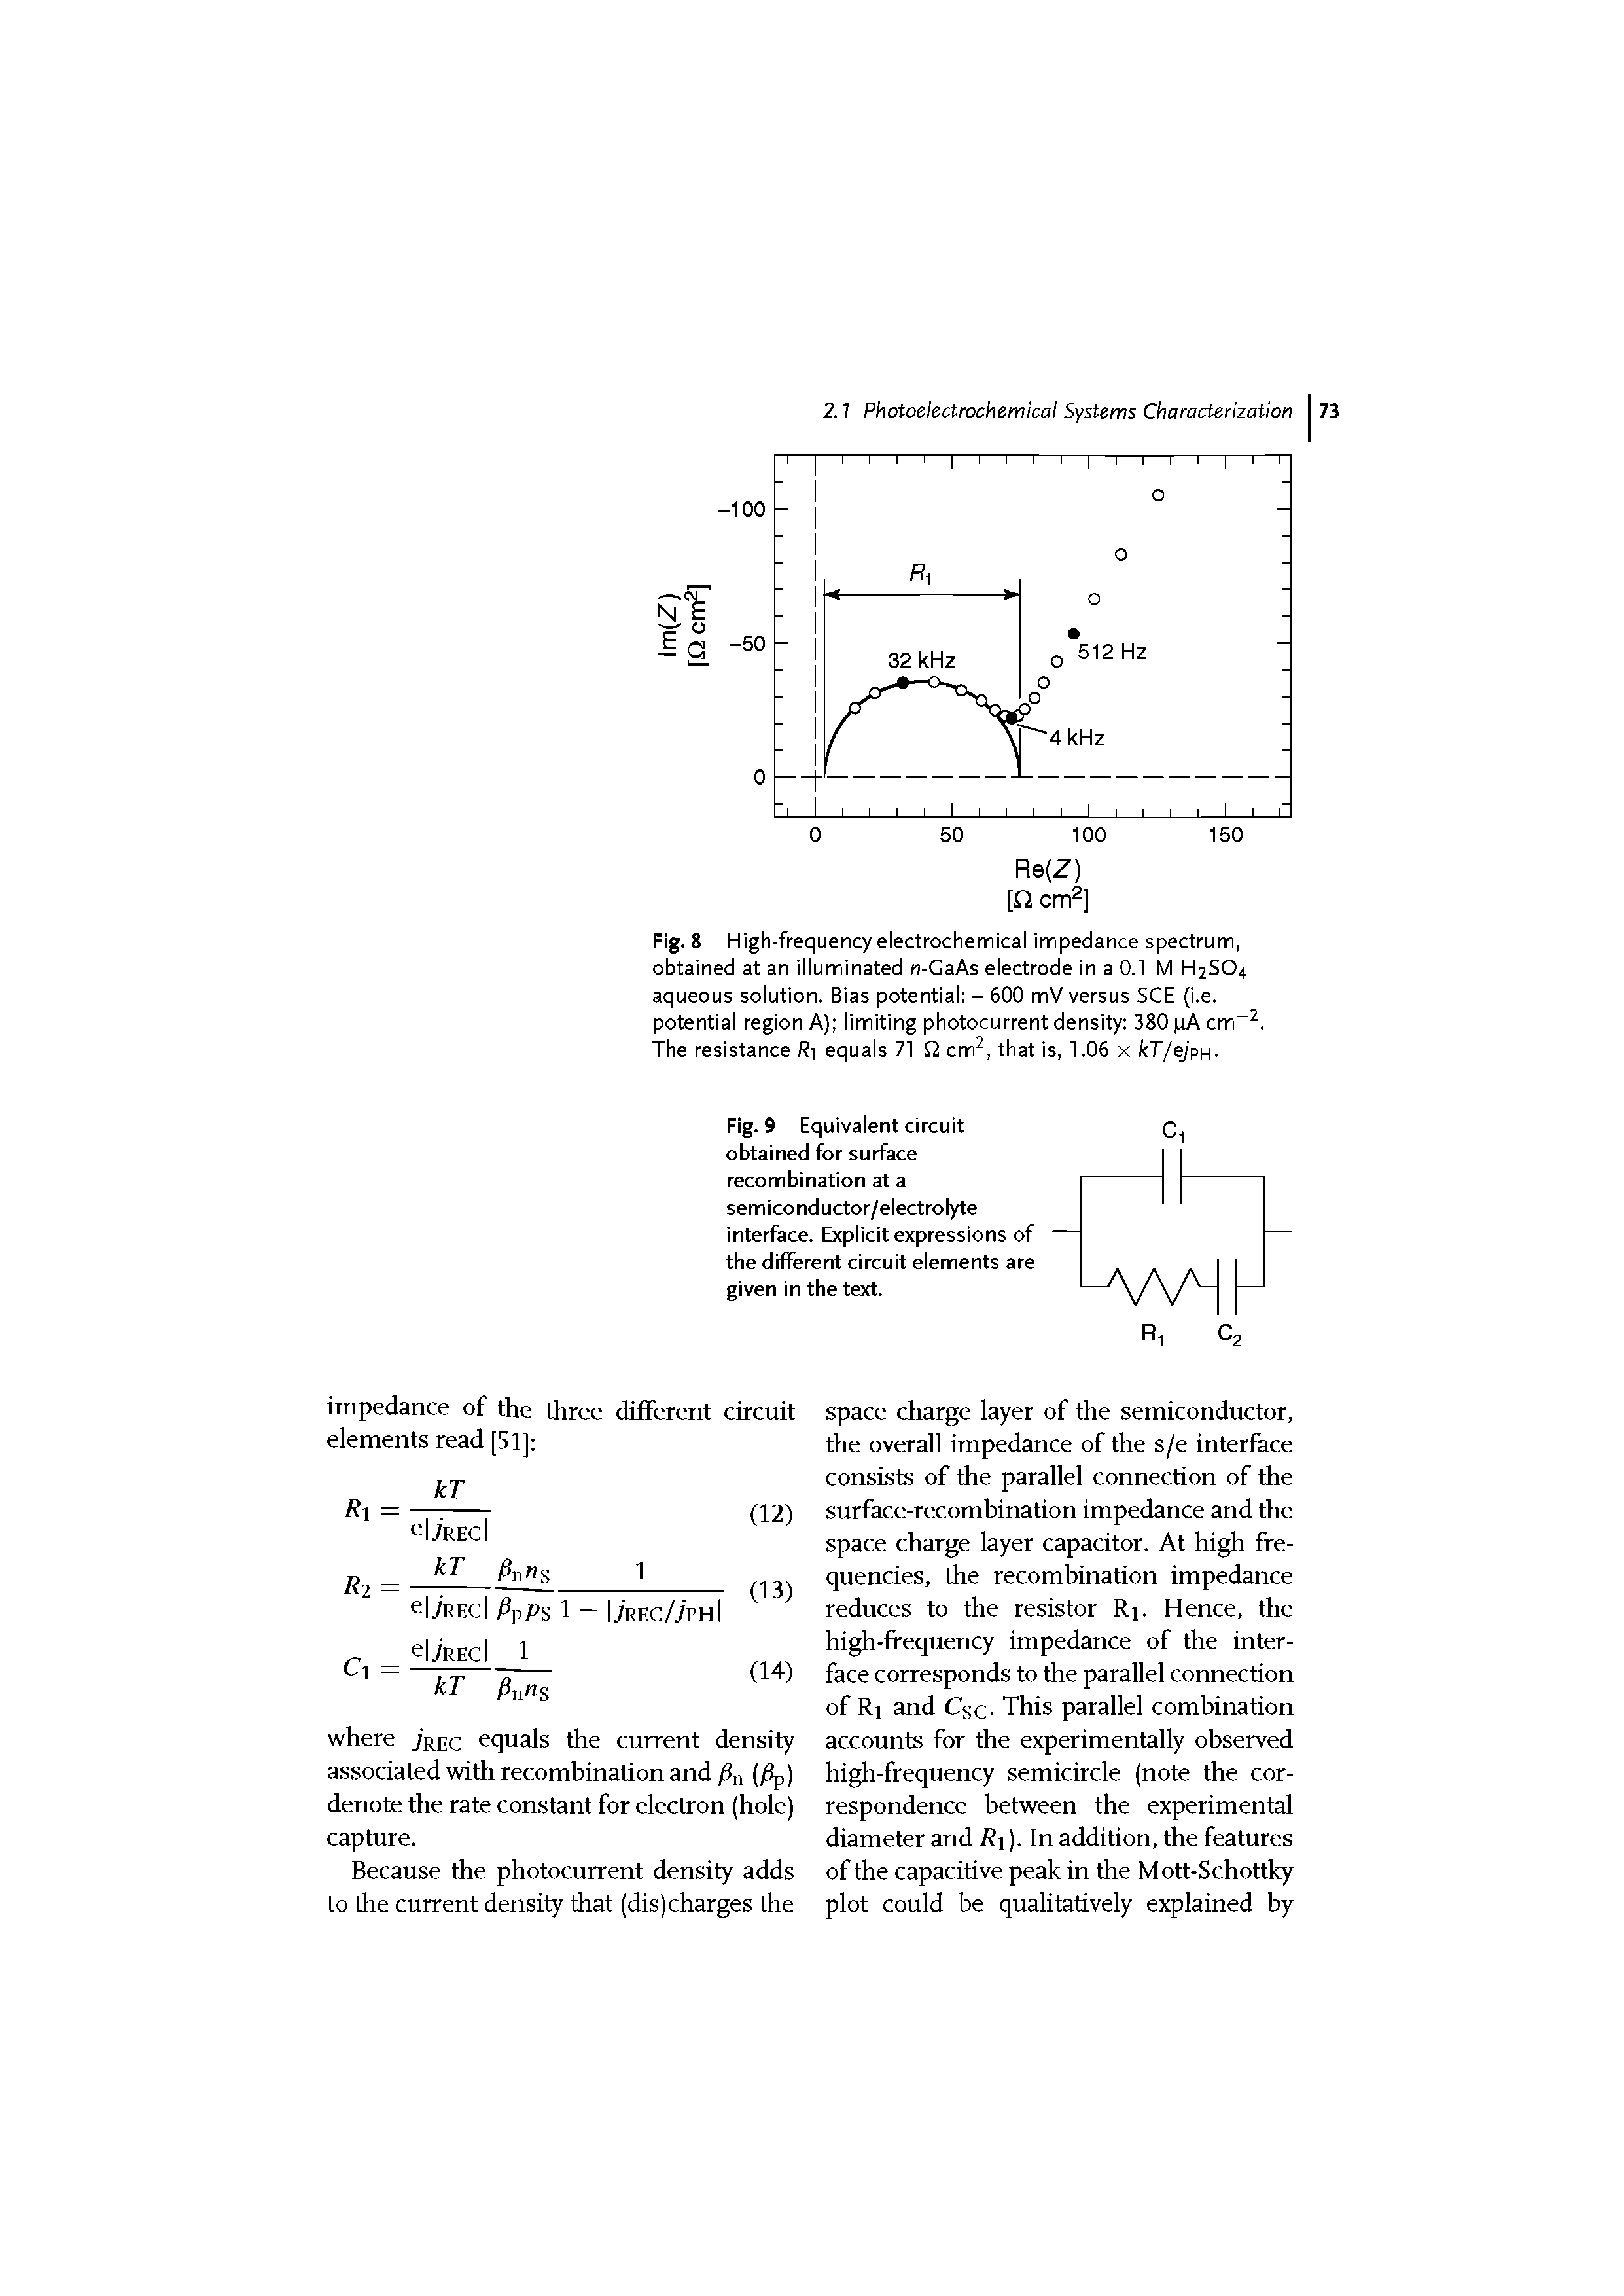 Fig. 8 High-frequency electrochemical impedance spectrum, obtained at an illuminated n-CaAs electrode in a 0.1 M H2SO4 aqueous solution. Bias potential - 600 mV versus SCE (i.e. potential region A) limiting photocurrent density 380 pA cm . The resistance R- equals 71 2 cm, that is, 1.06 x kT/ejpu.